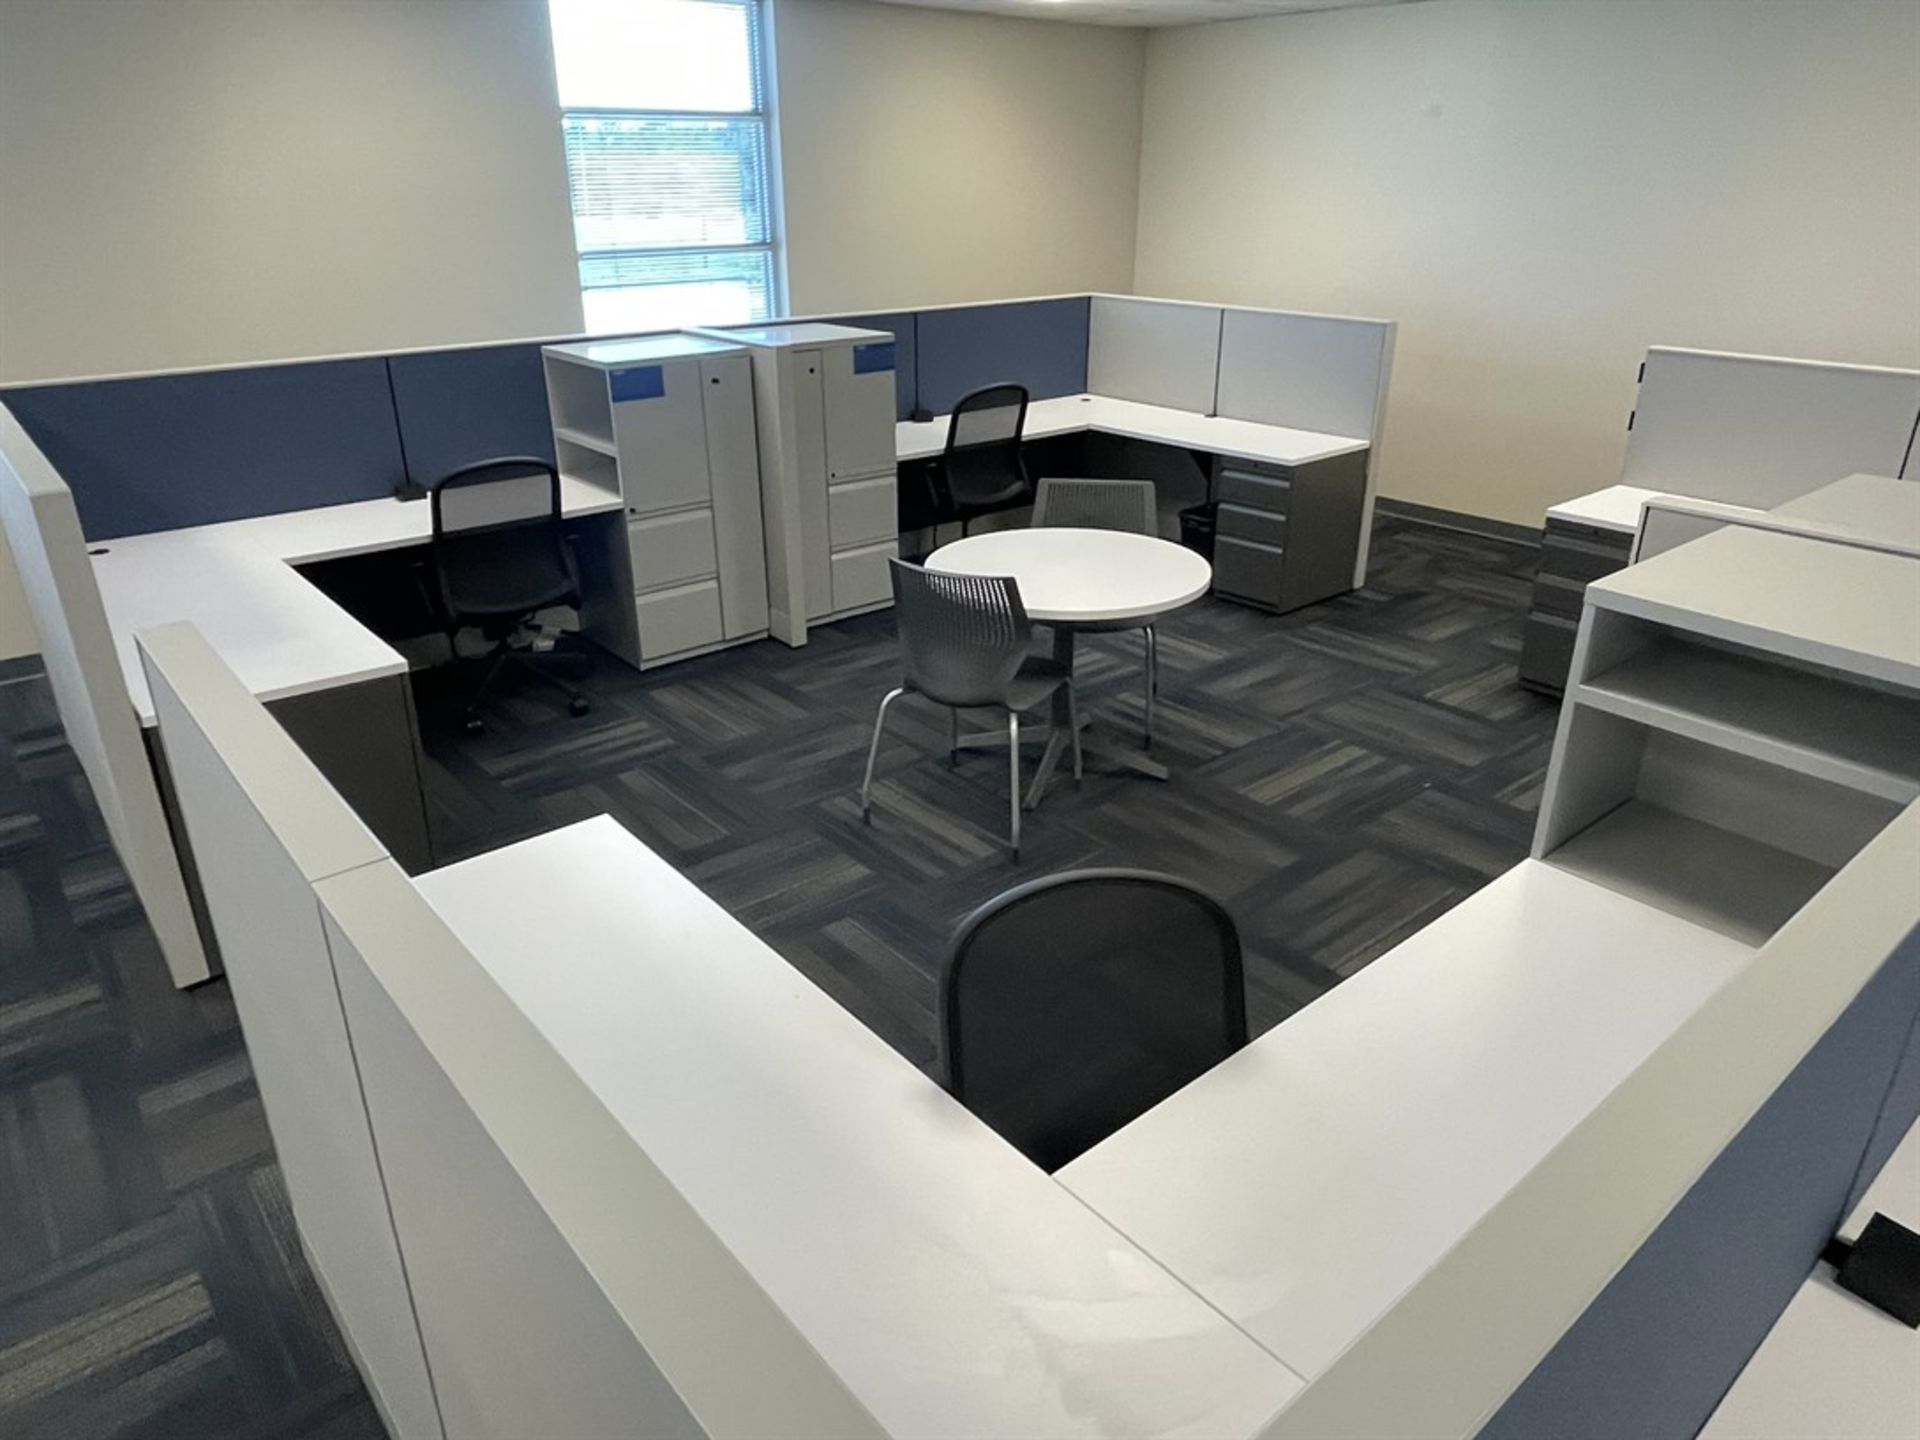 Lot of (11) Cubicles w/ Desk, Chairs, Tables and Cabinets - Image 5 of 5